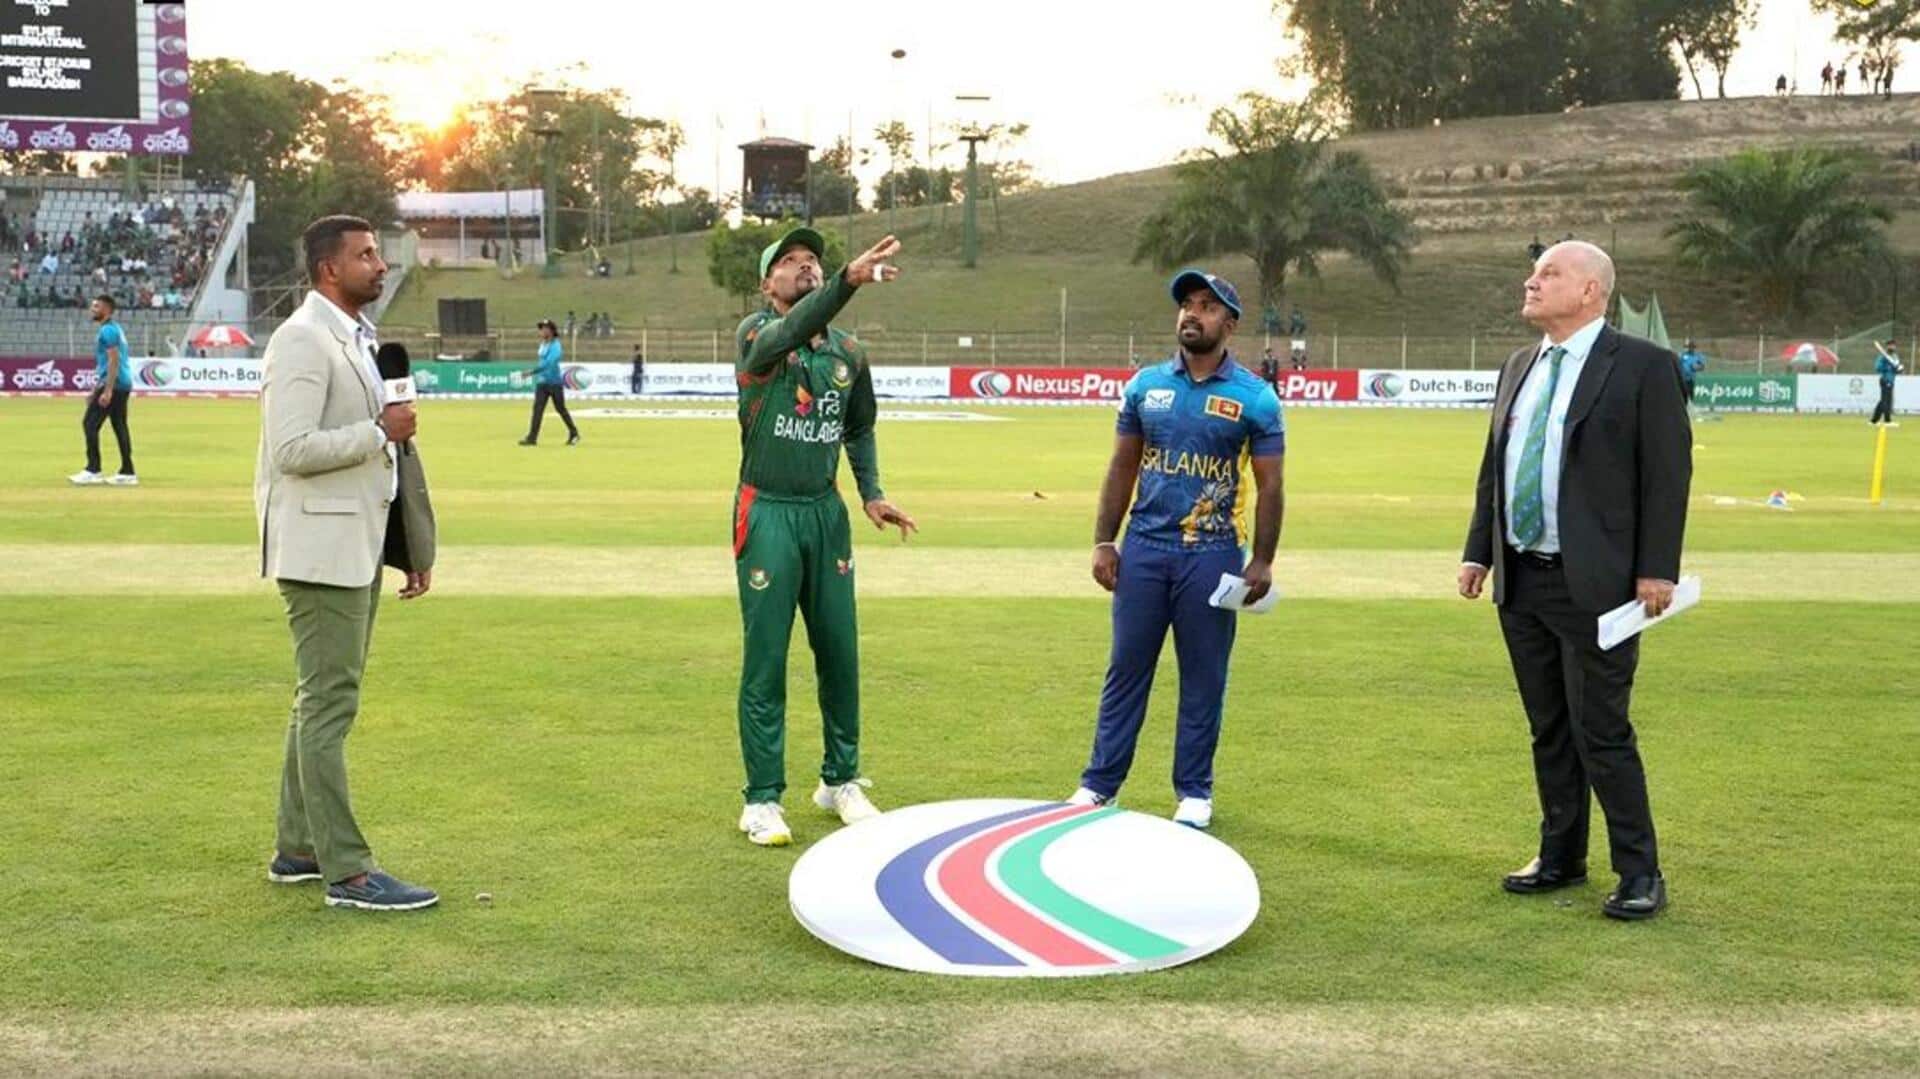 Will Bangladesh bounce back against Sri Lanka? 2nd T20I preview 